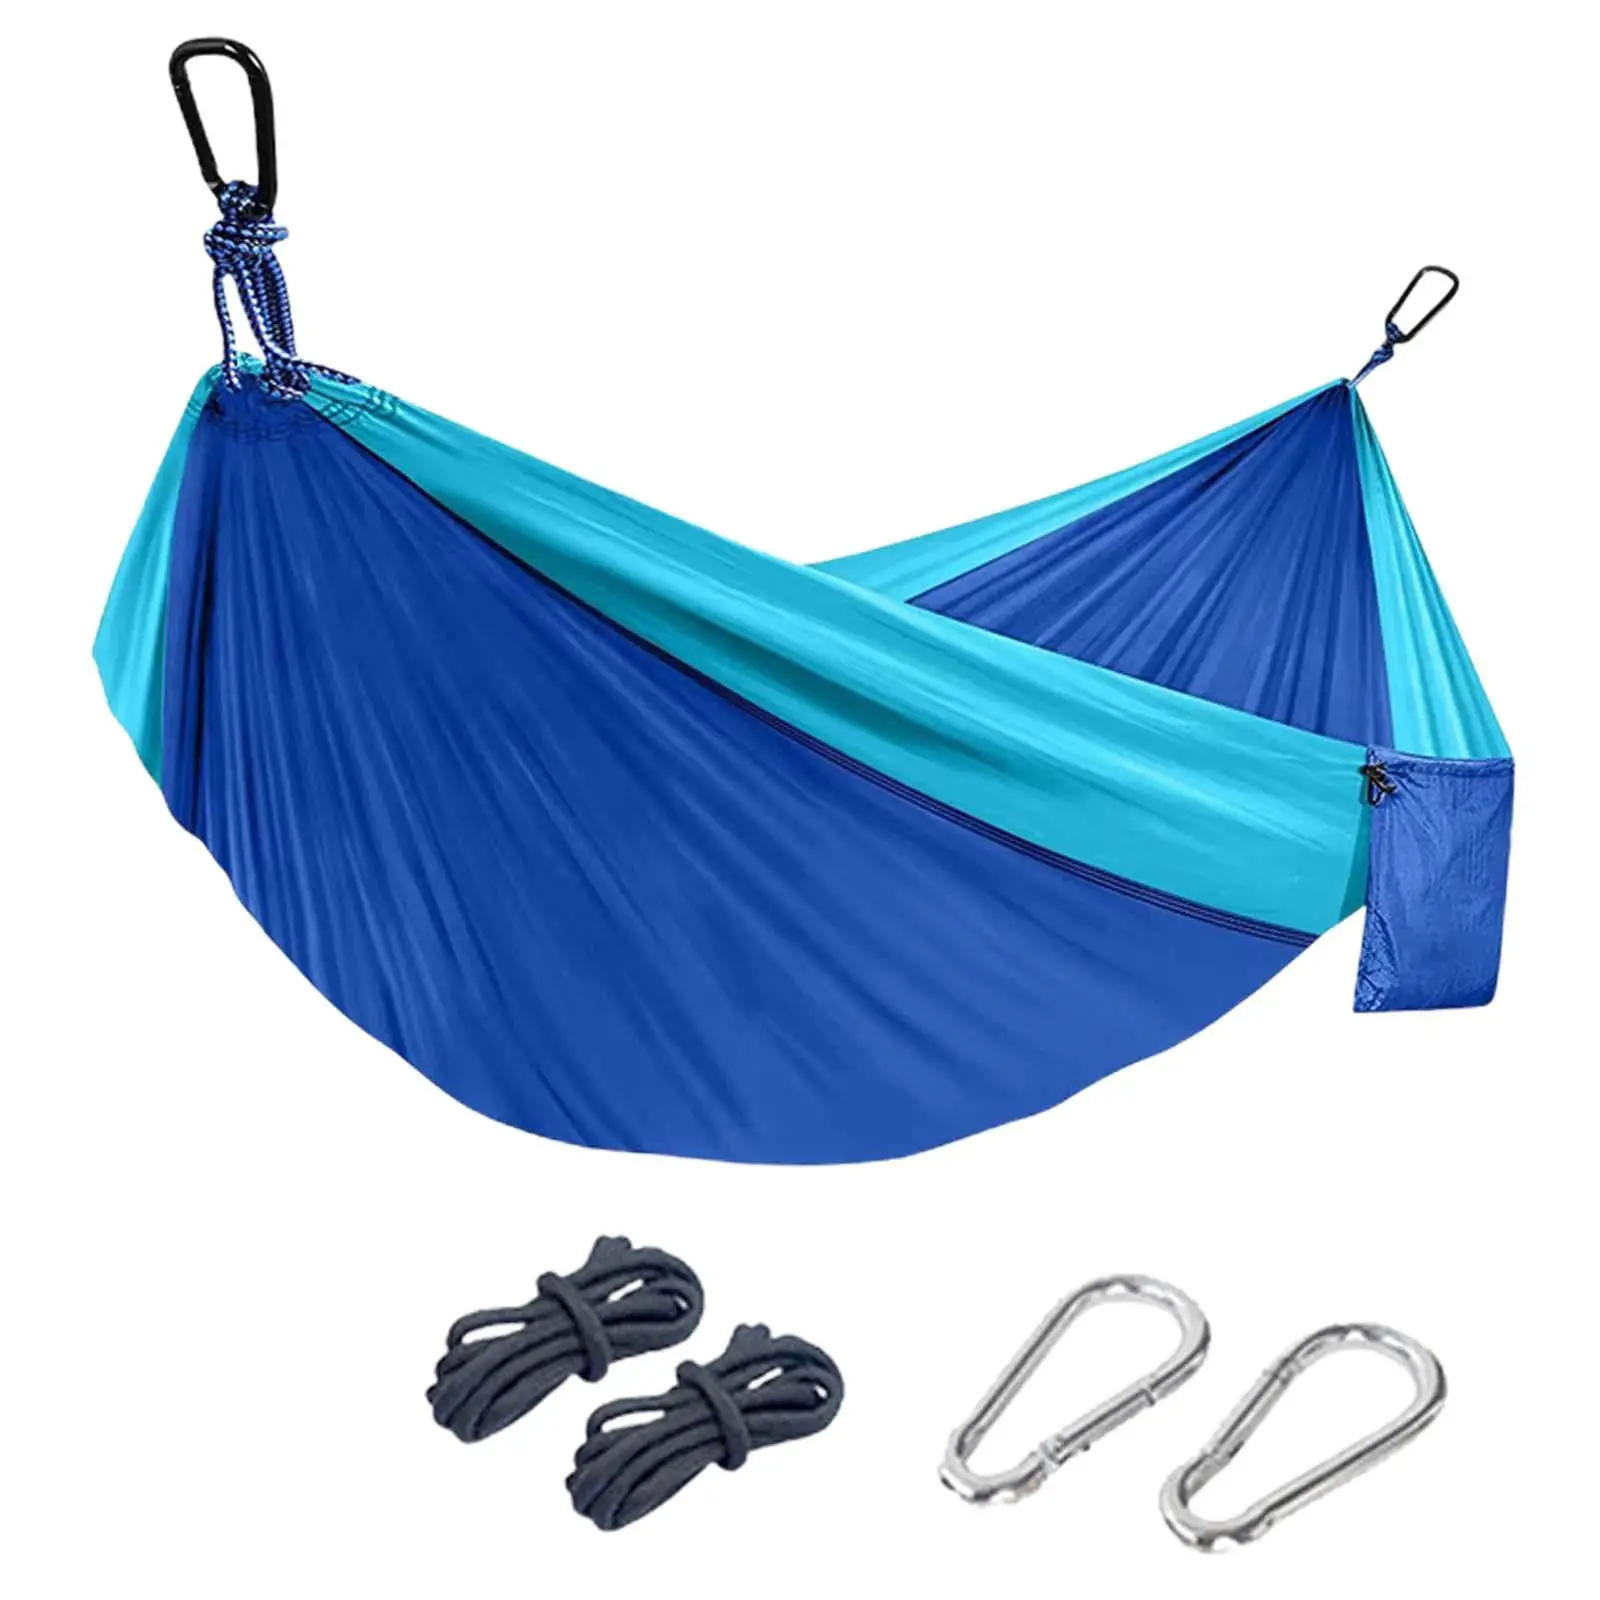 Outdoor Camping Travel Hammock Lightweight Portable Hammock Single or Double Hammock for Hiking Beach Backpacking Travel Outdoor